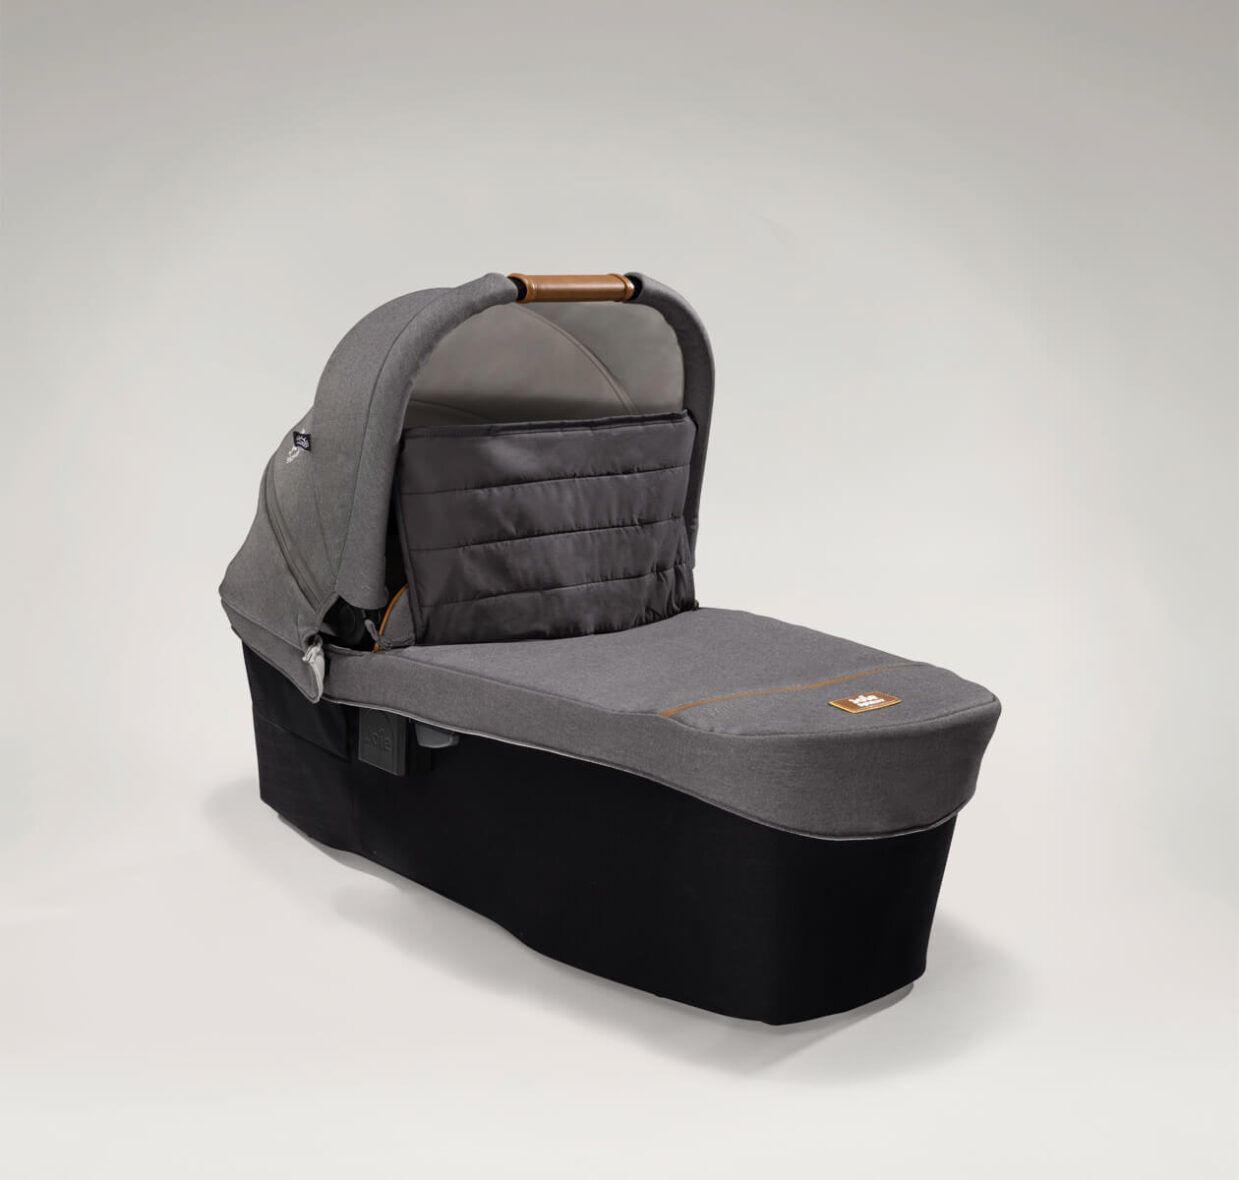 p5-joie-signature-carrycot-ramblexl-carbon-right-angle-windshield